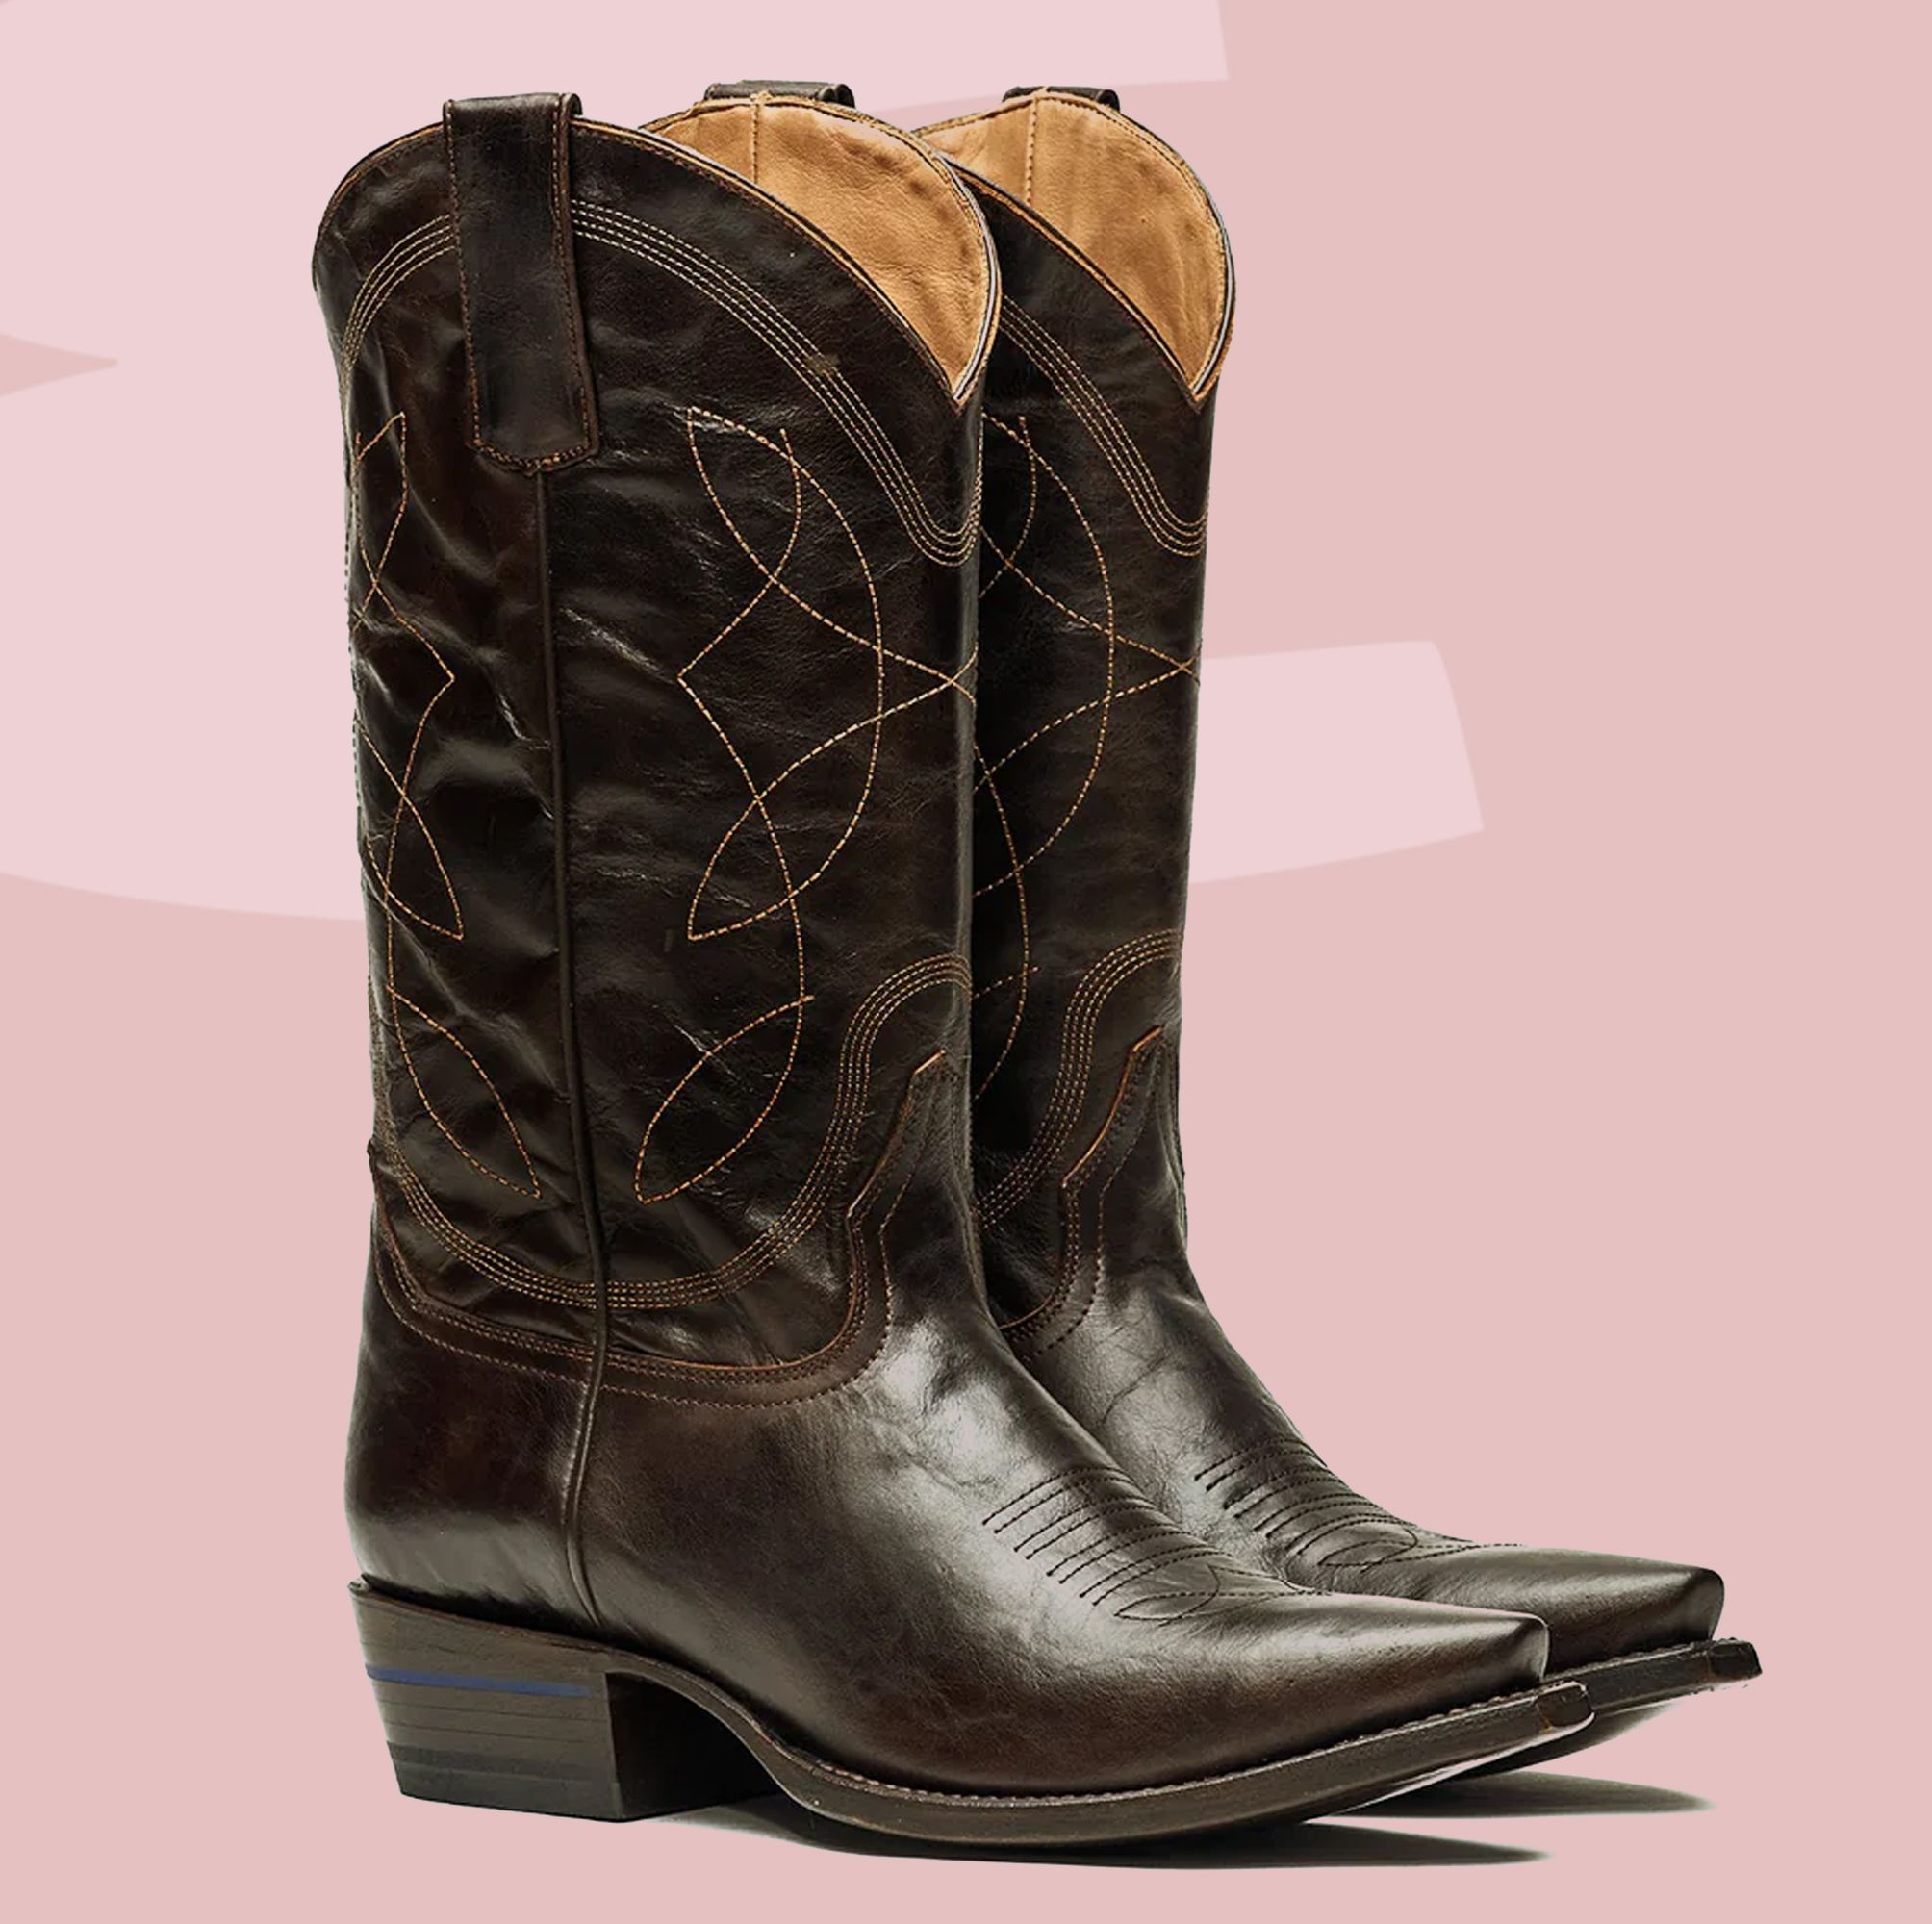 15 Cowboy Boot Brands That Prove Western Style Is Here to Stay